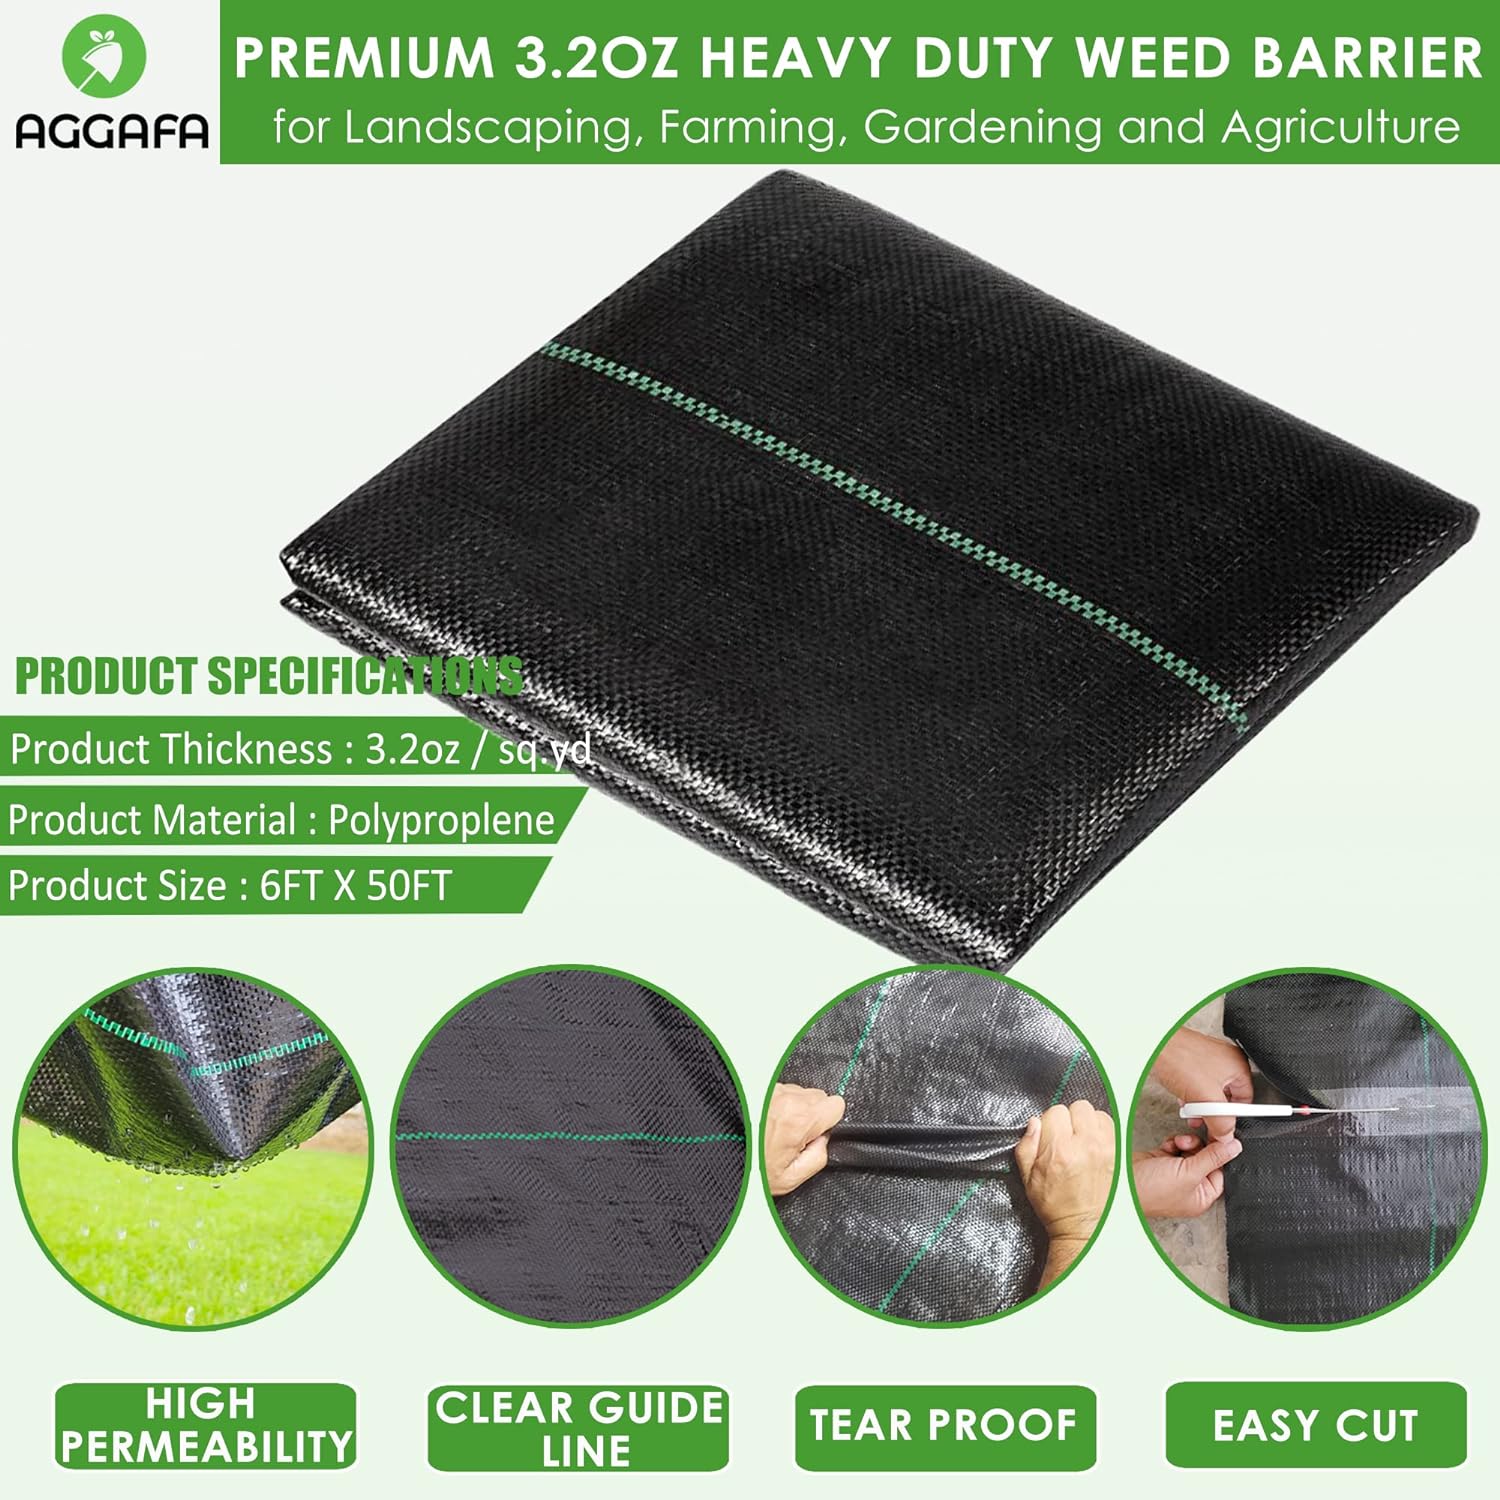 (6ft x 50ft 100% Virgin Material. Premium Heavy Duty Weed Barrier Fabric for Landscaping, Farming, Gardening and Agriculture. Durable Woven Landscape Fabric